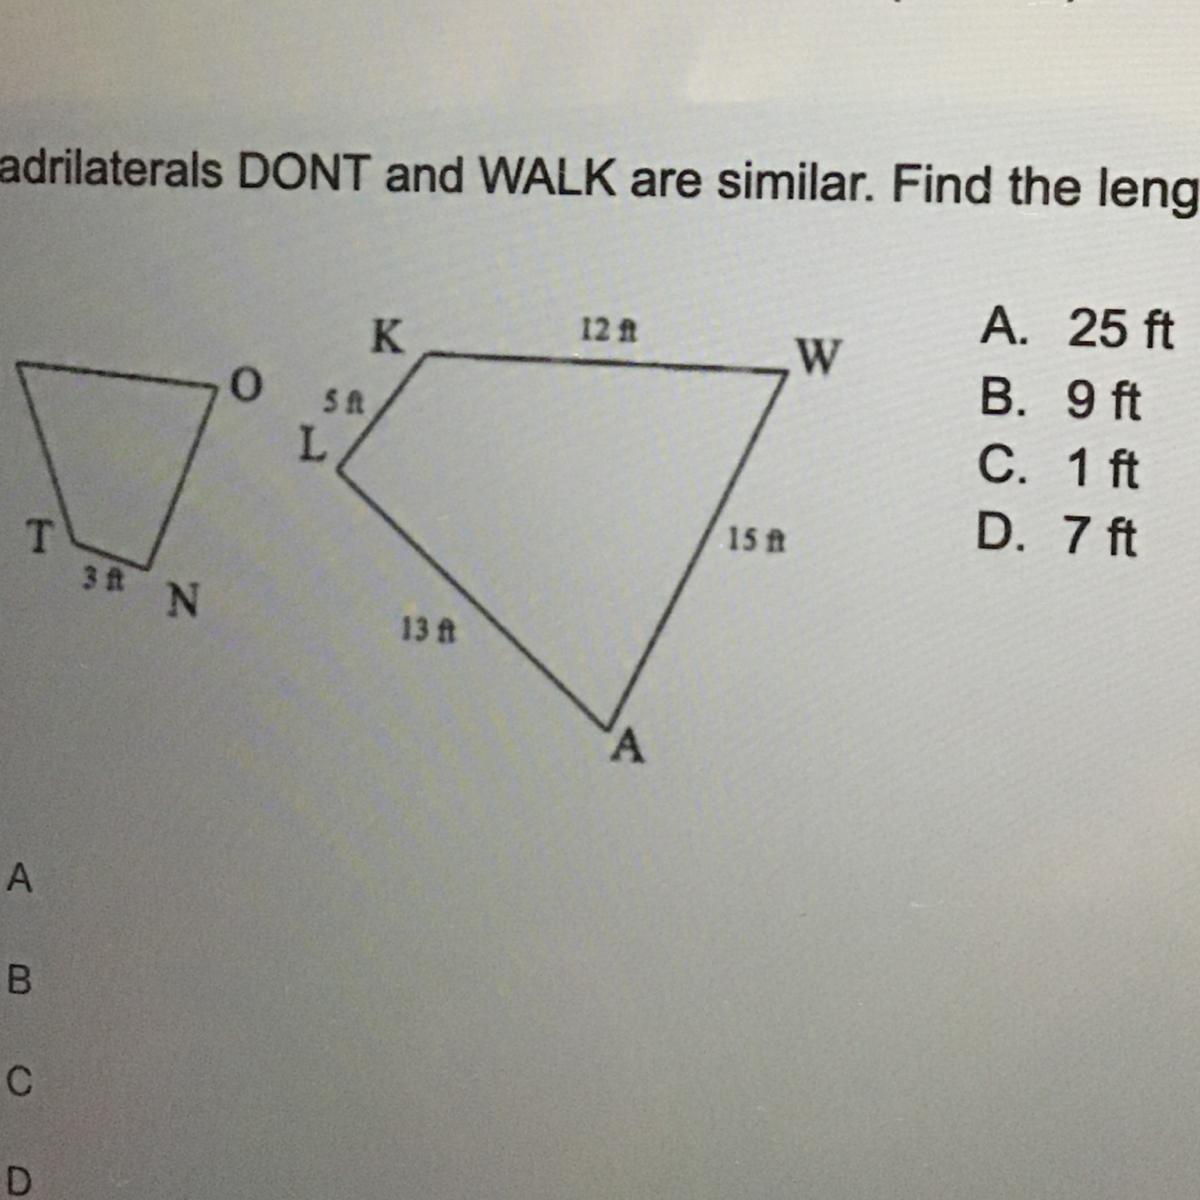 Quadrilaterals DONT And WALK Are Similar. Find The Length Of Side DO.(15 Points)Send ASAP PLSS